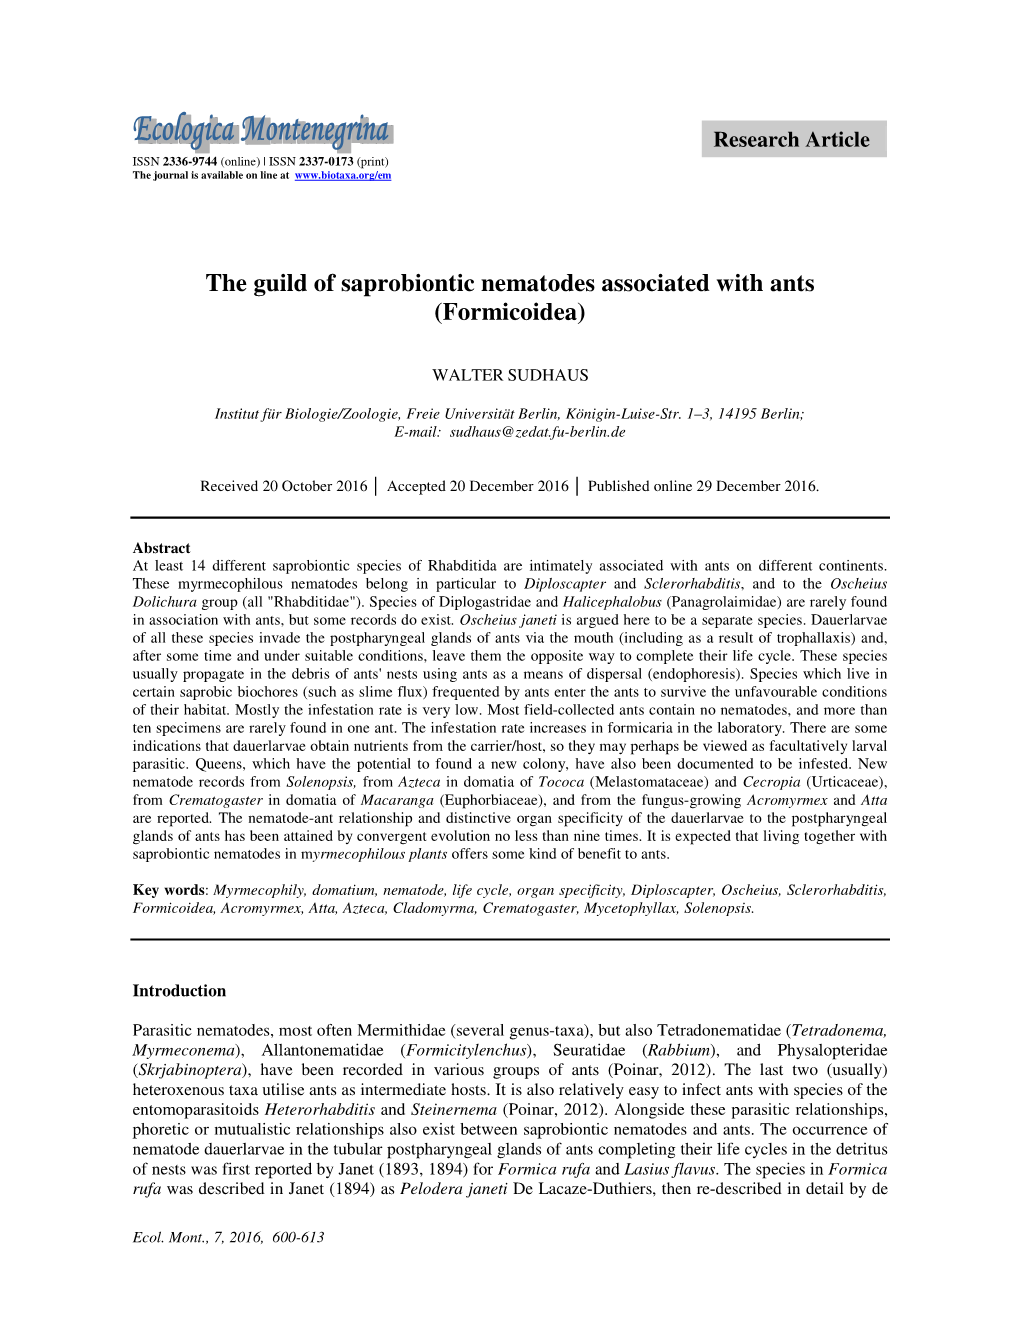 The Guild of Saprobiontic Nematodes Associated with Ants (Formicoidea)